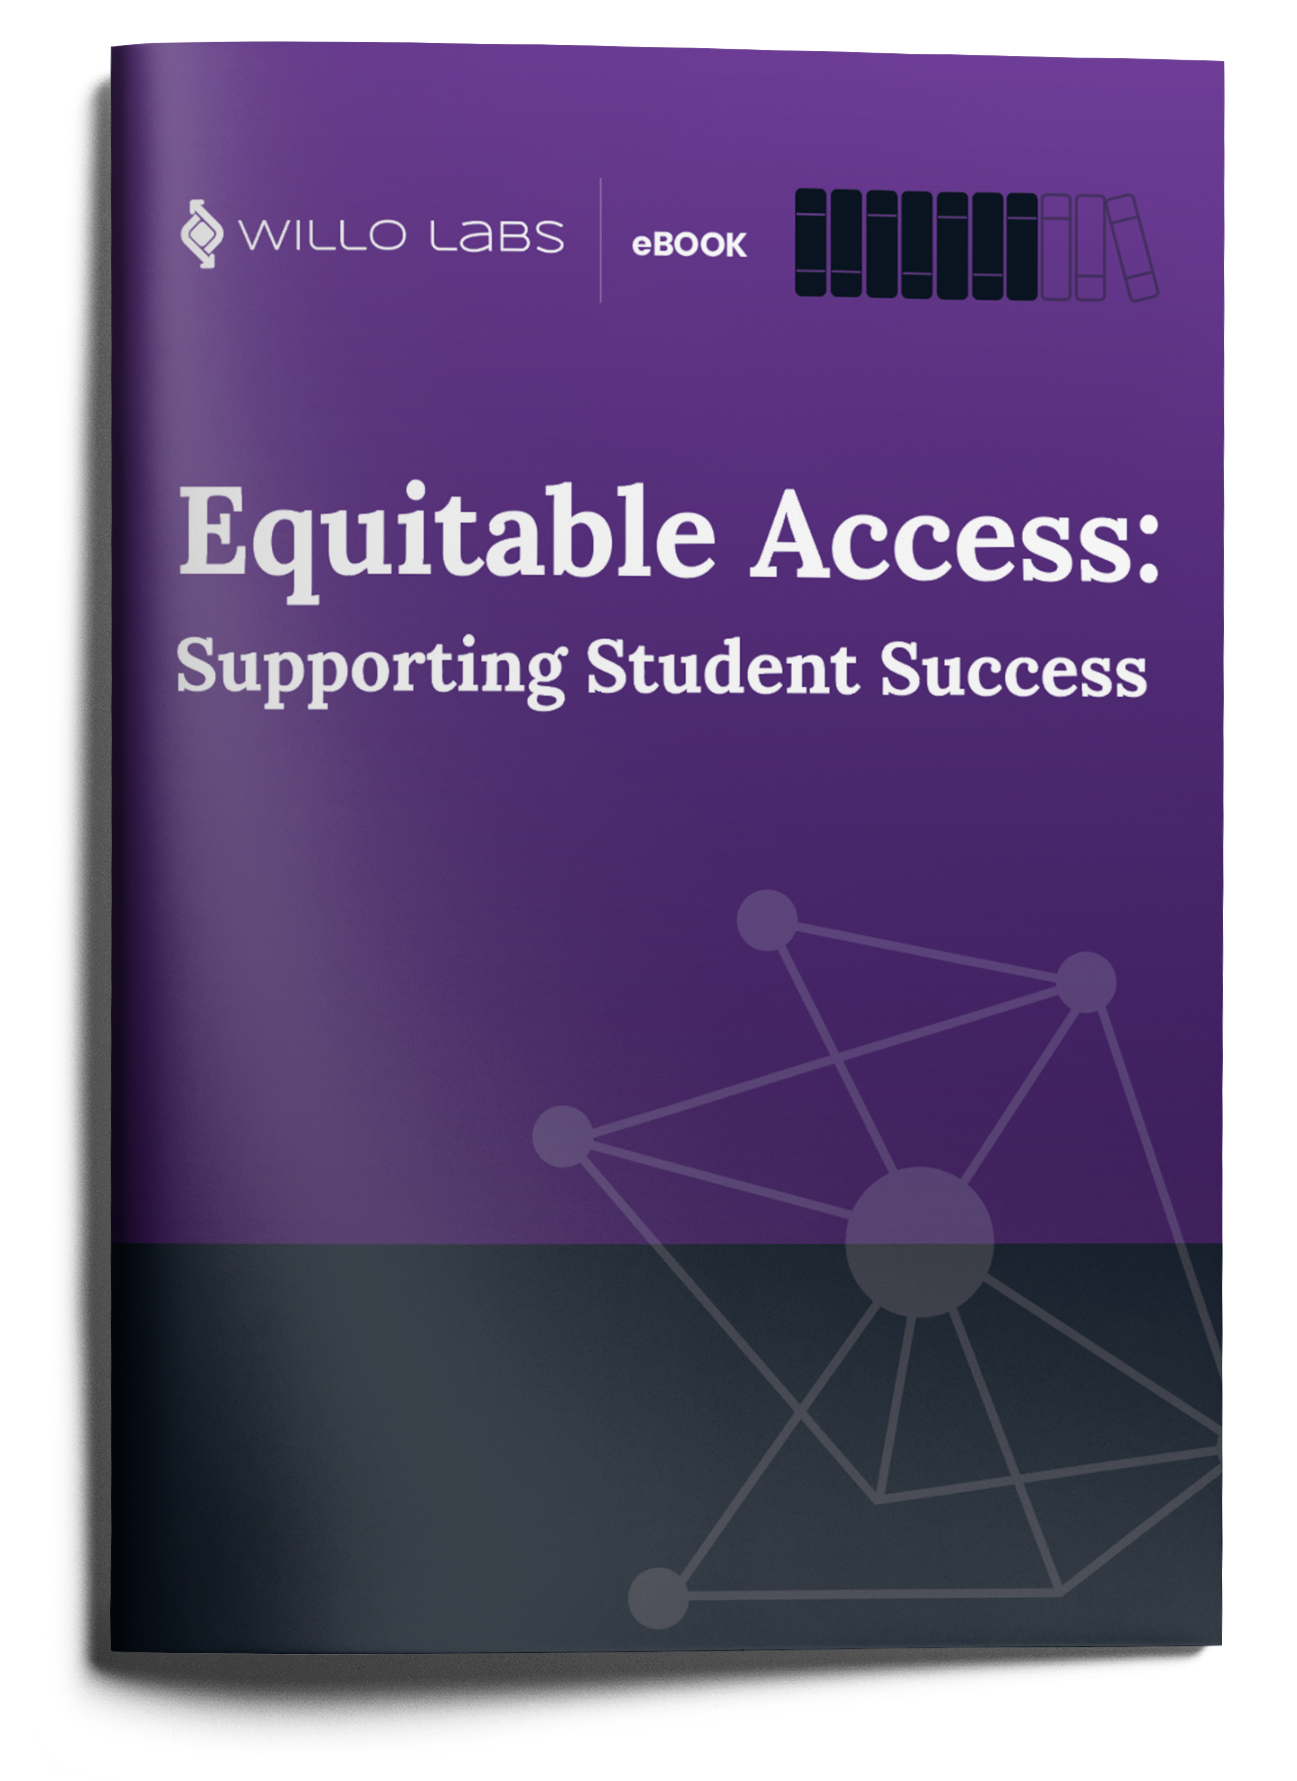 Willo Labs-Equitable Access-ebook-cover